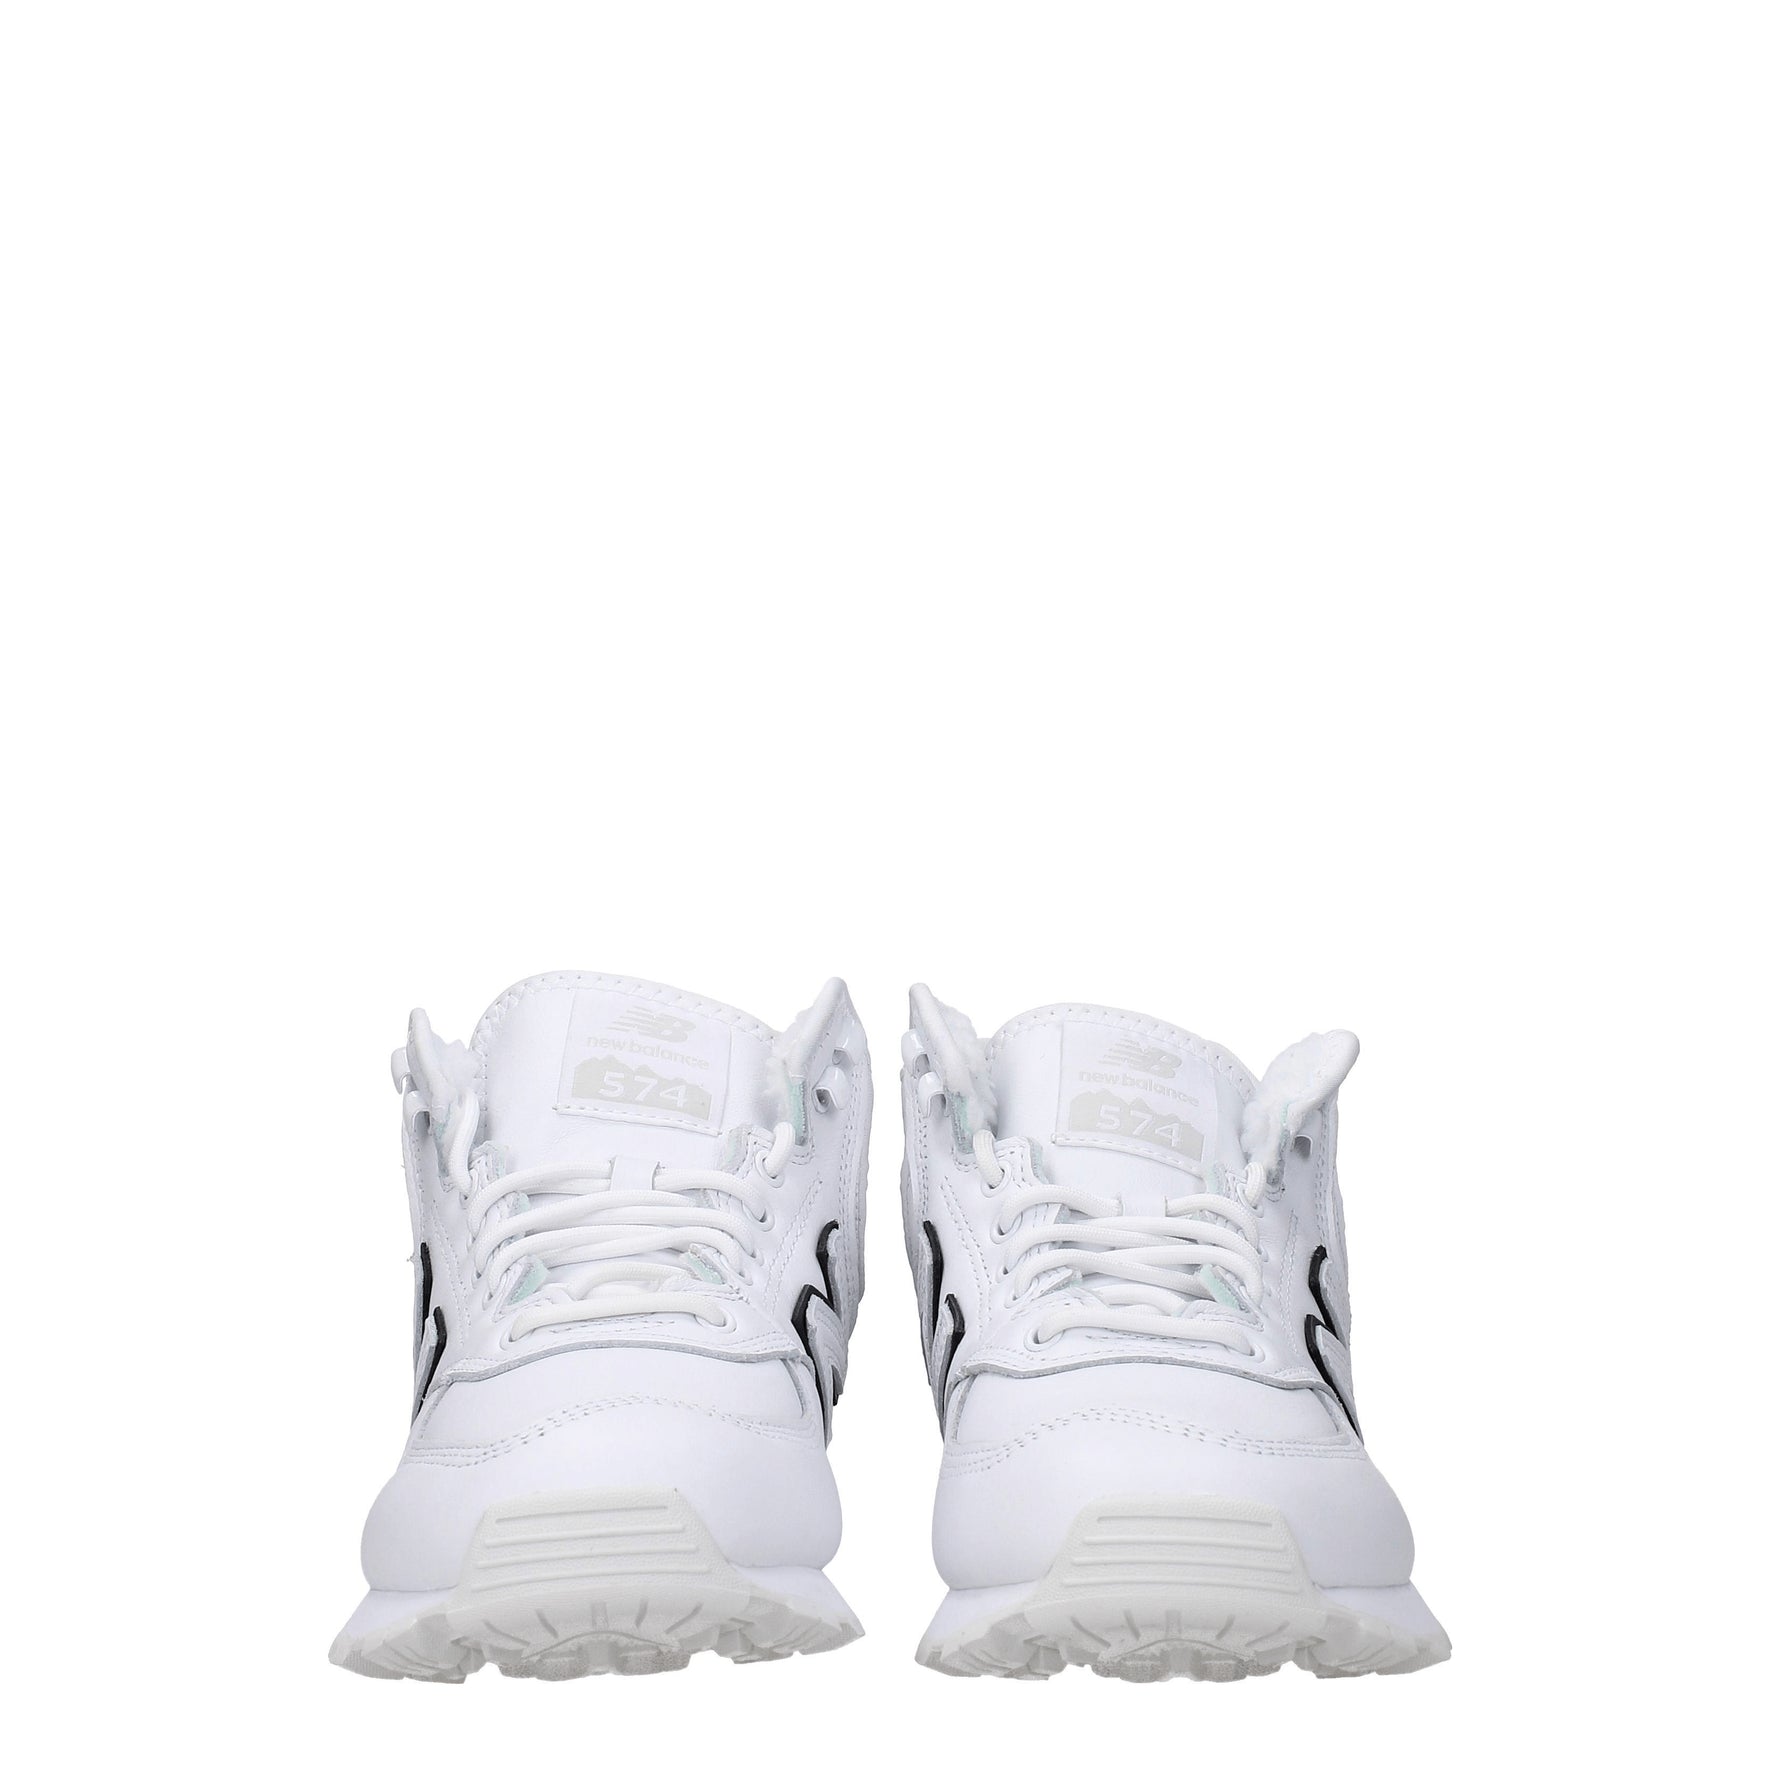 New Balance Sneakers comme des garcons Uomo Pelle Bianco